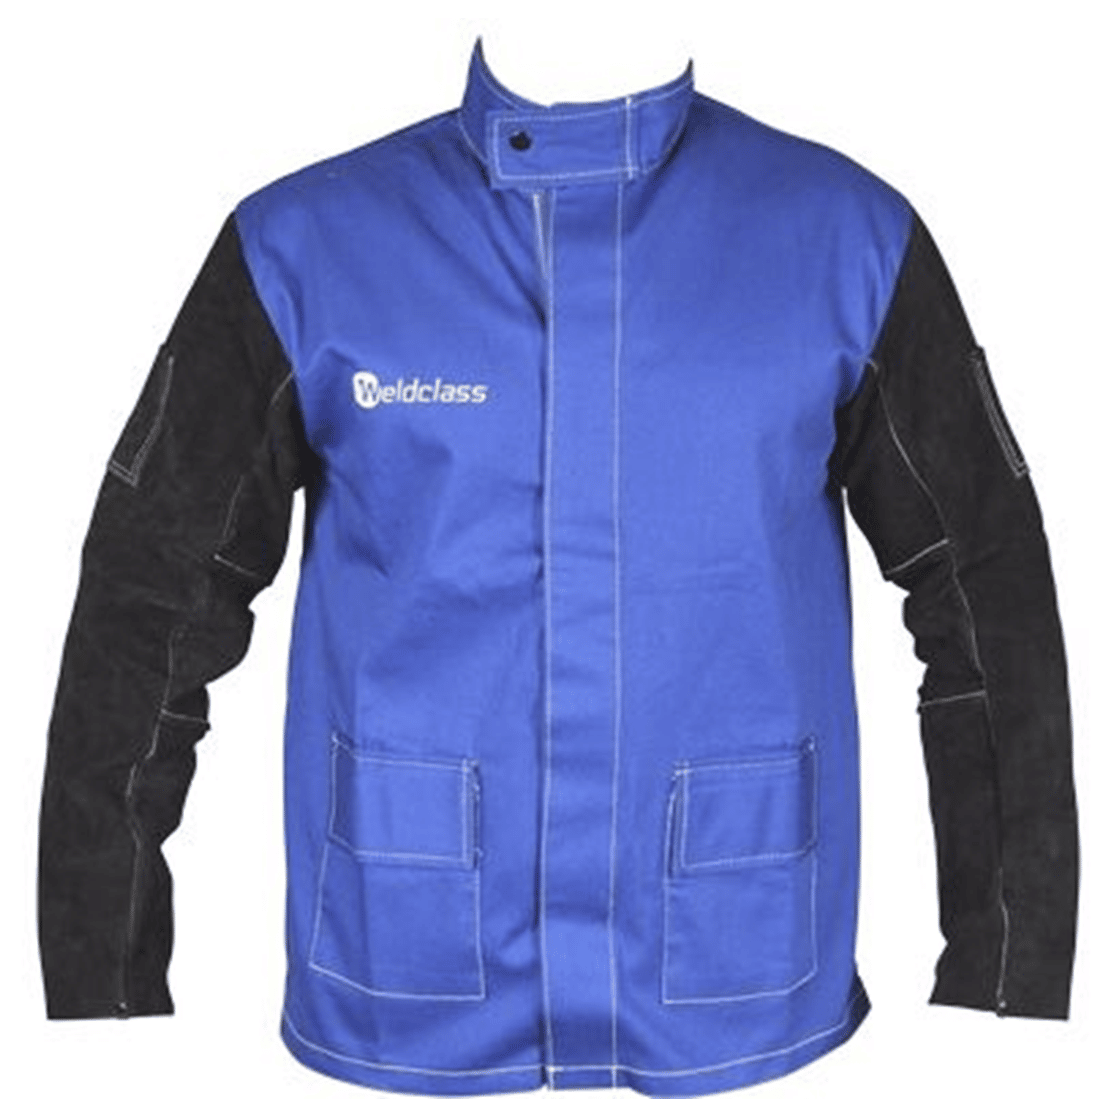 WC-0465 Weldclass Promax Blue FR Welding Jacket with Leather Sleeves ...